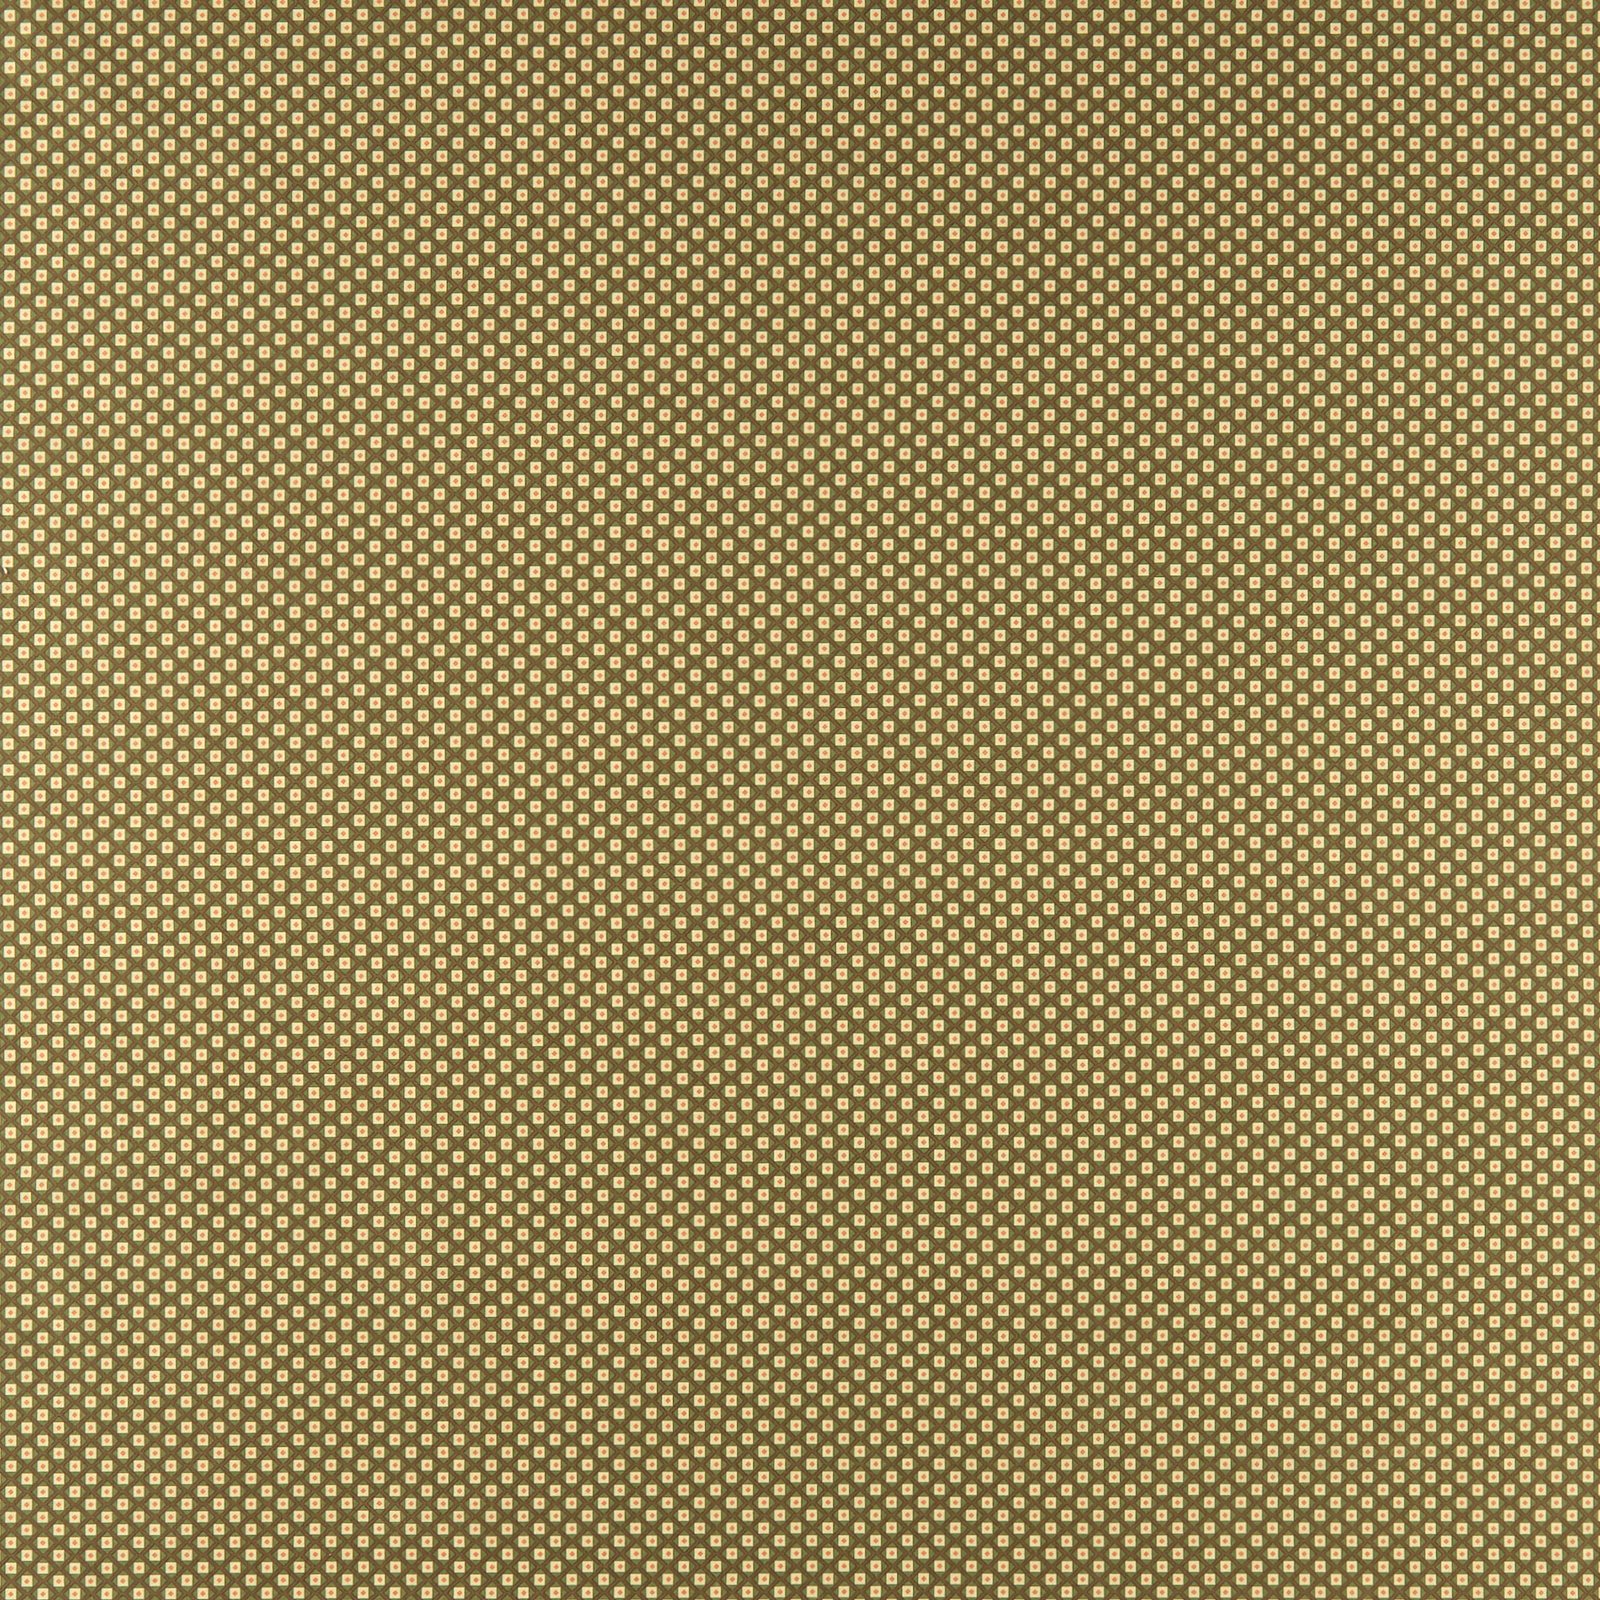 Cotton light army green square pattern 852481_pack_sp